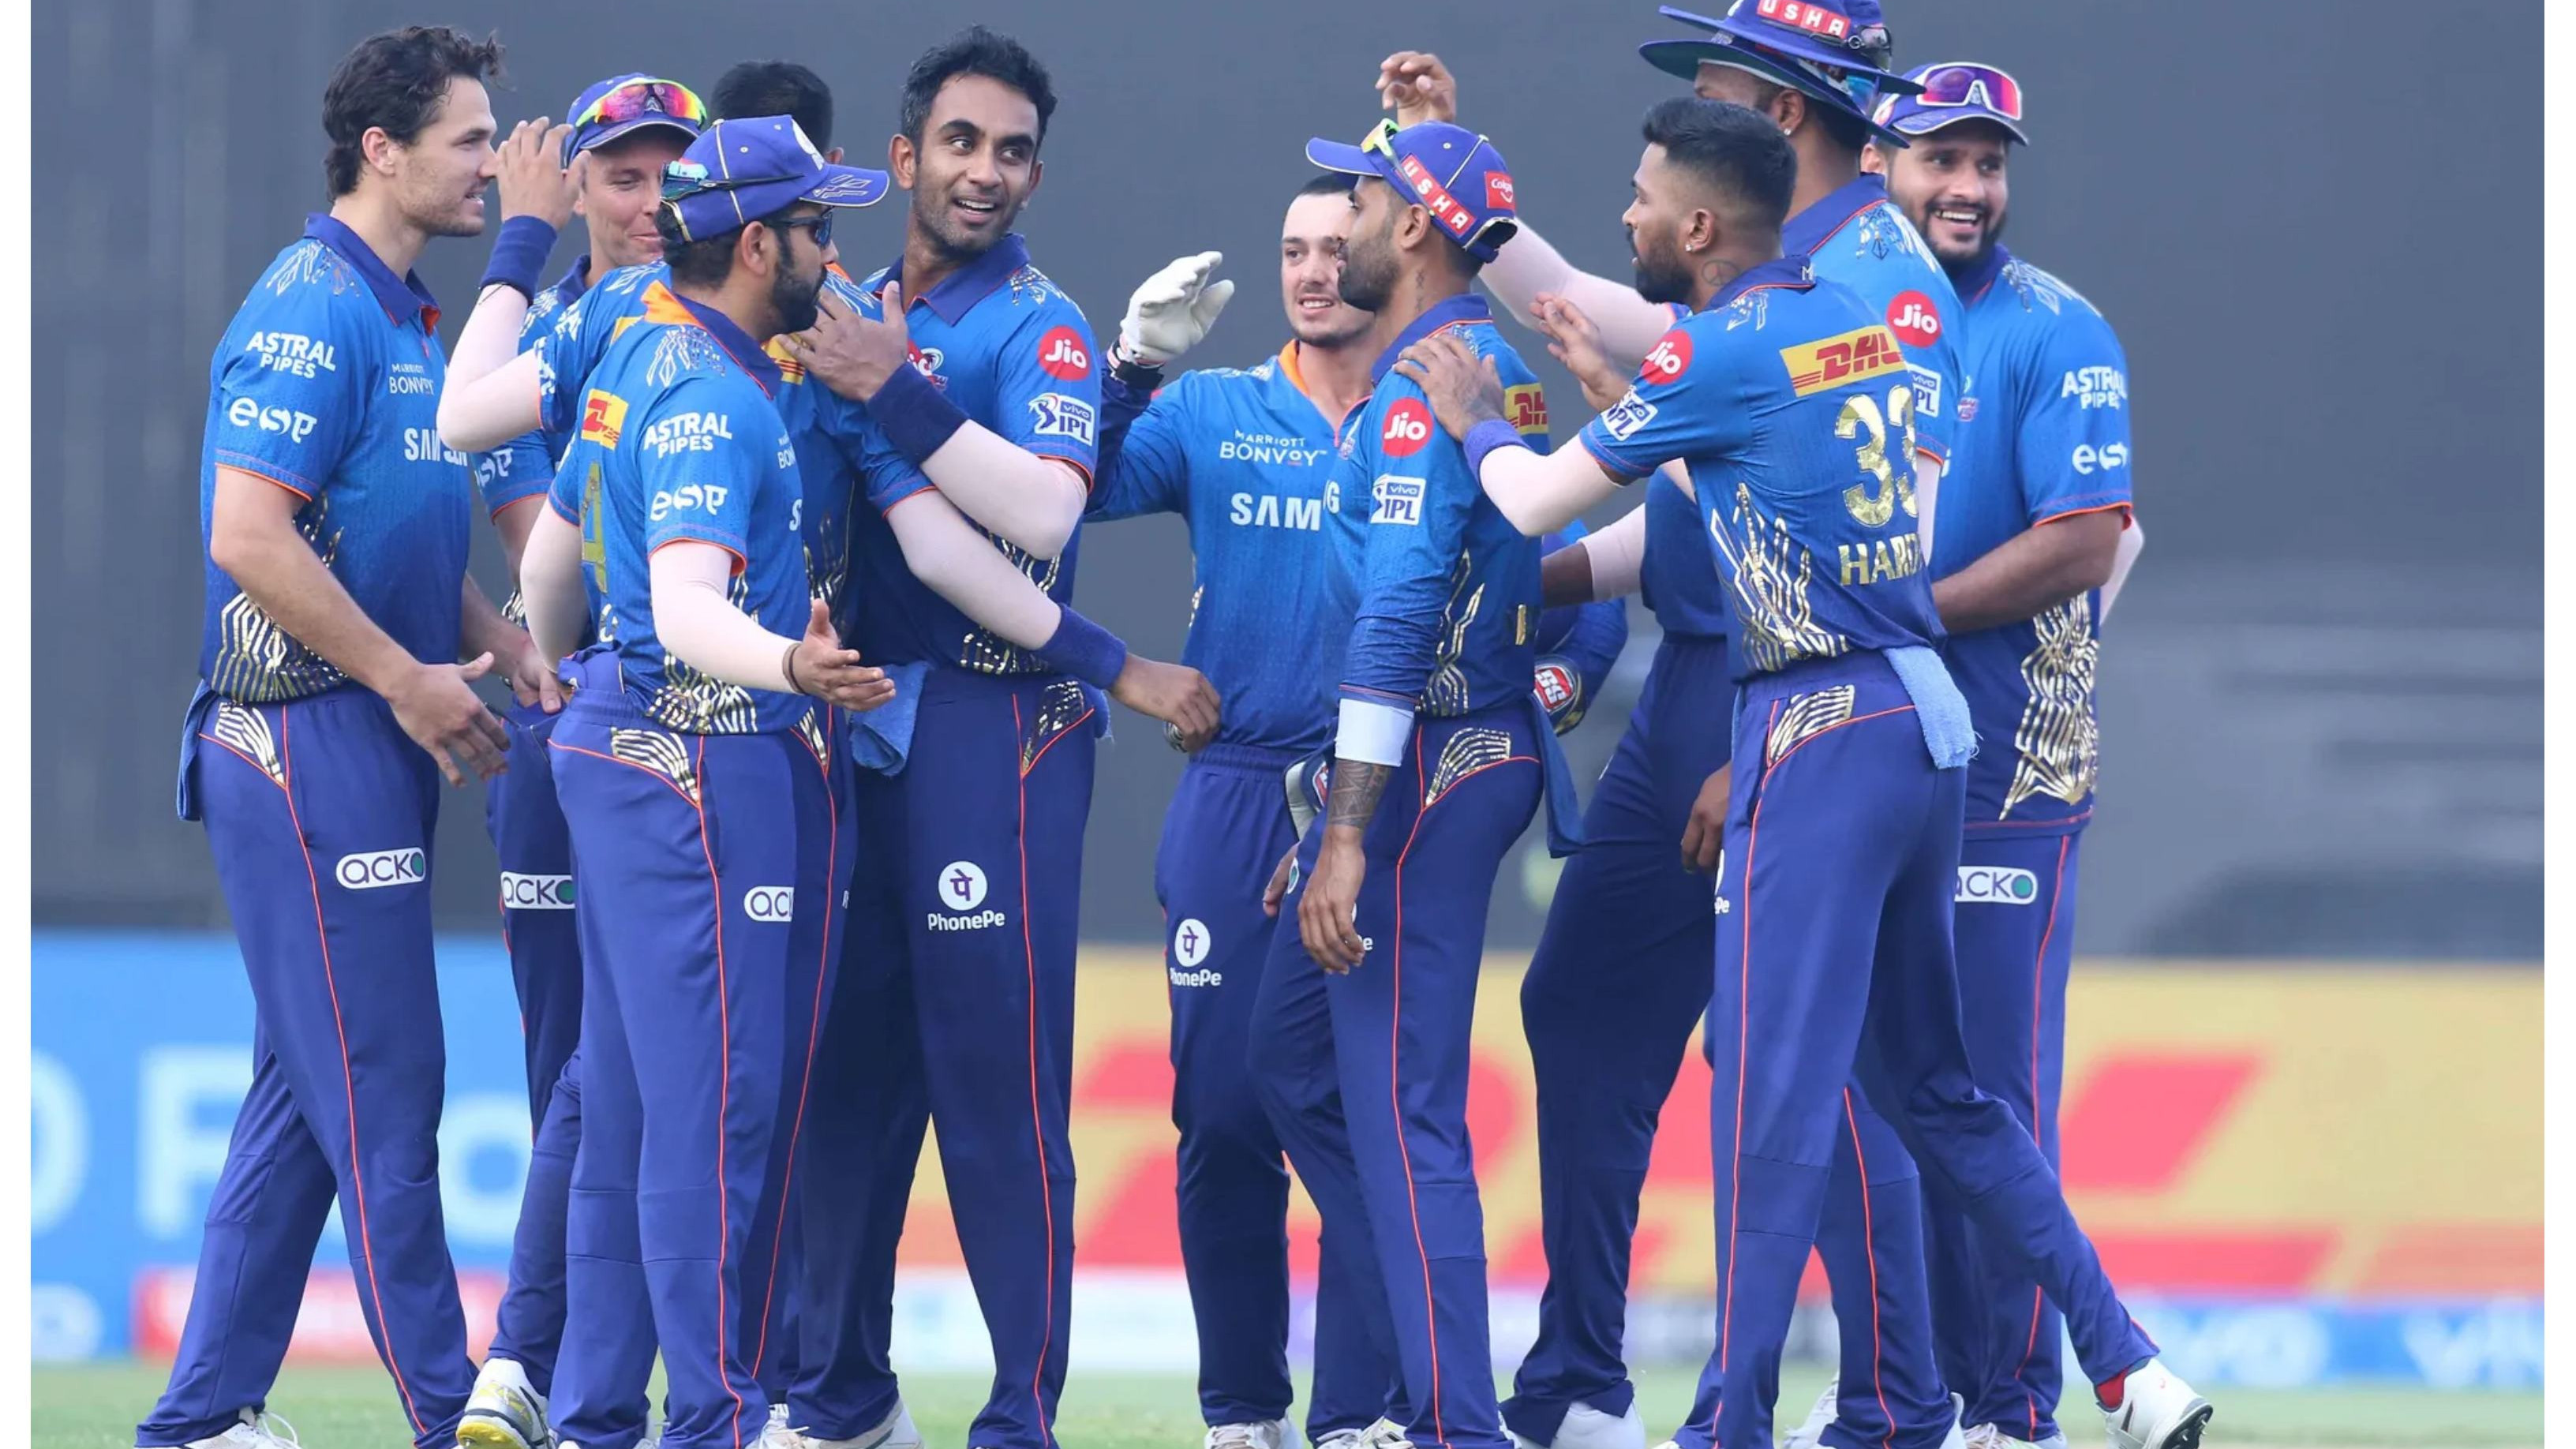 IPL 2021: “Something's missing in our game”, Rohit Sharma feels MI not playing to their potential